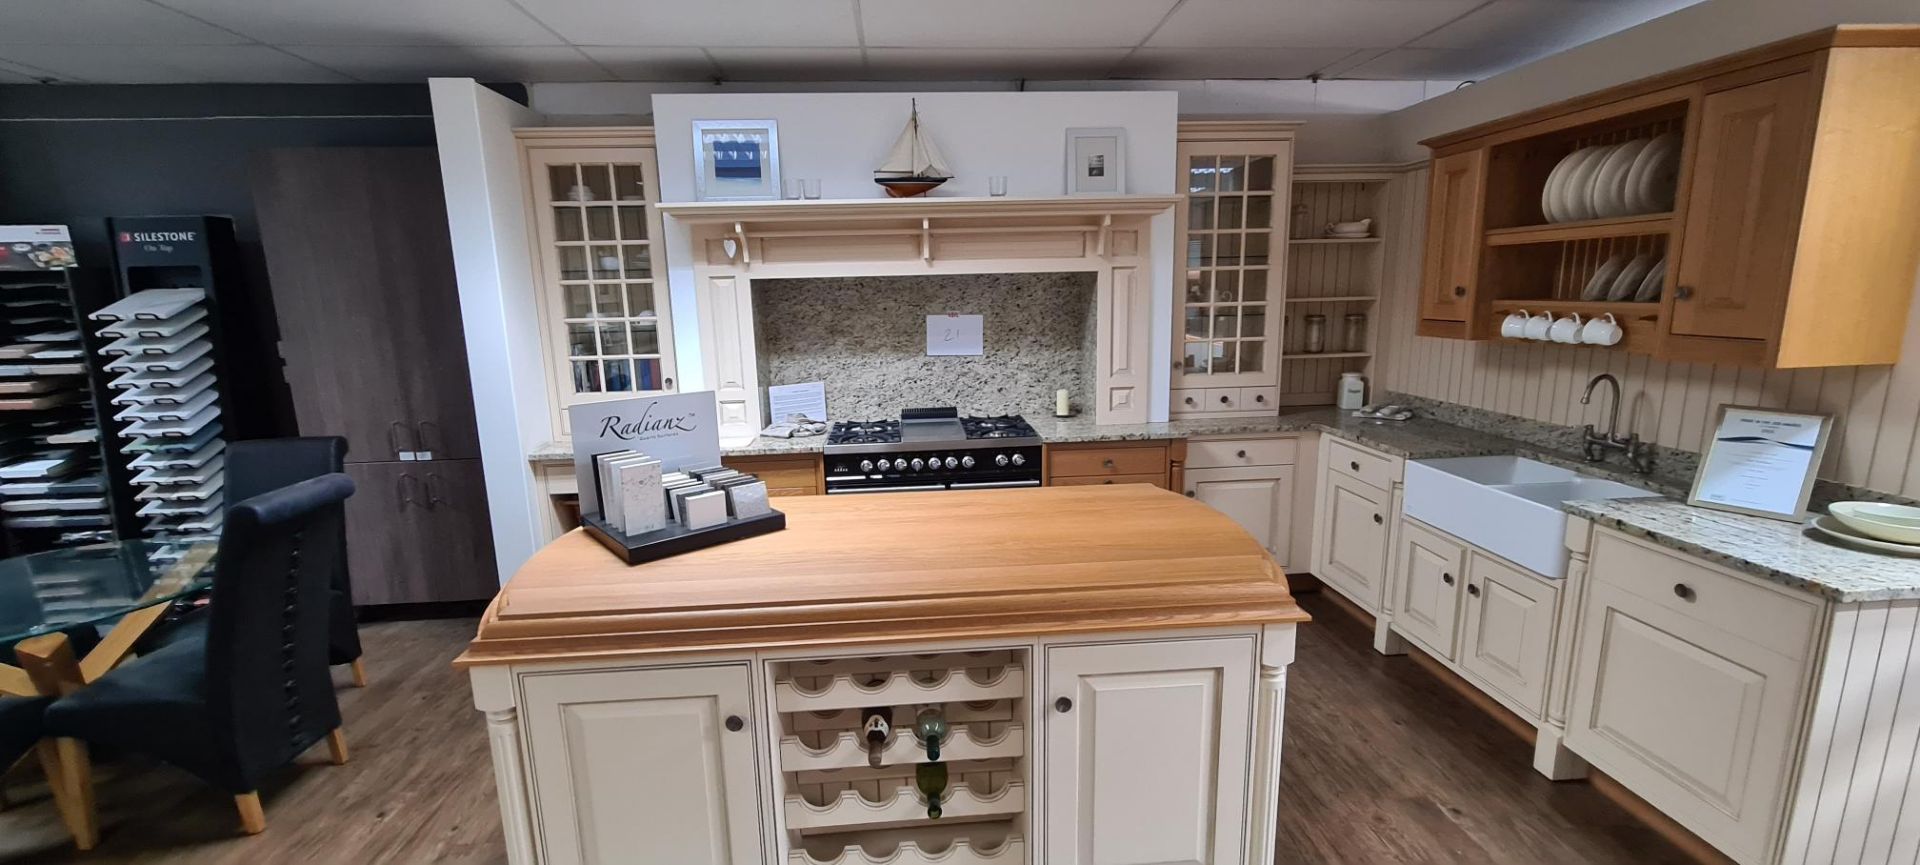 Showroom Hatt kitchen comprising: Door – Face Frame MDF hand painted Cream with feature units in